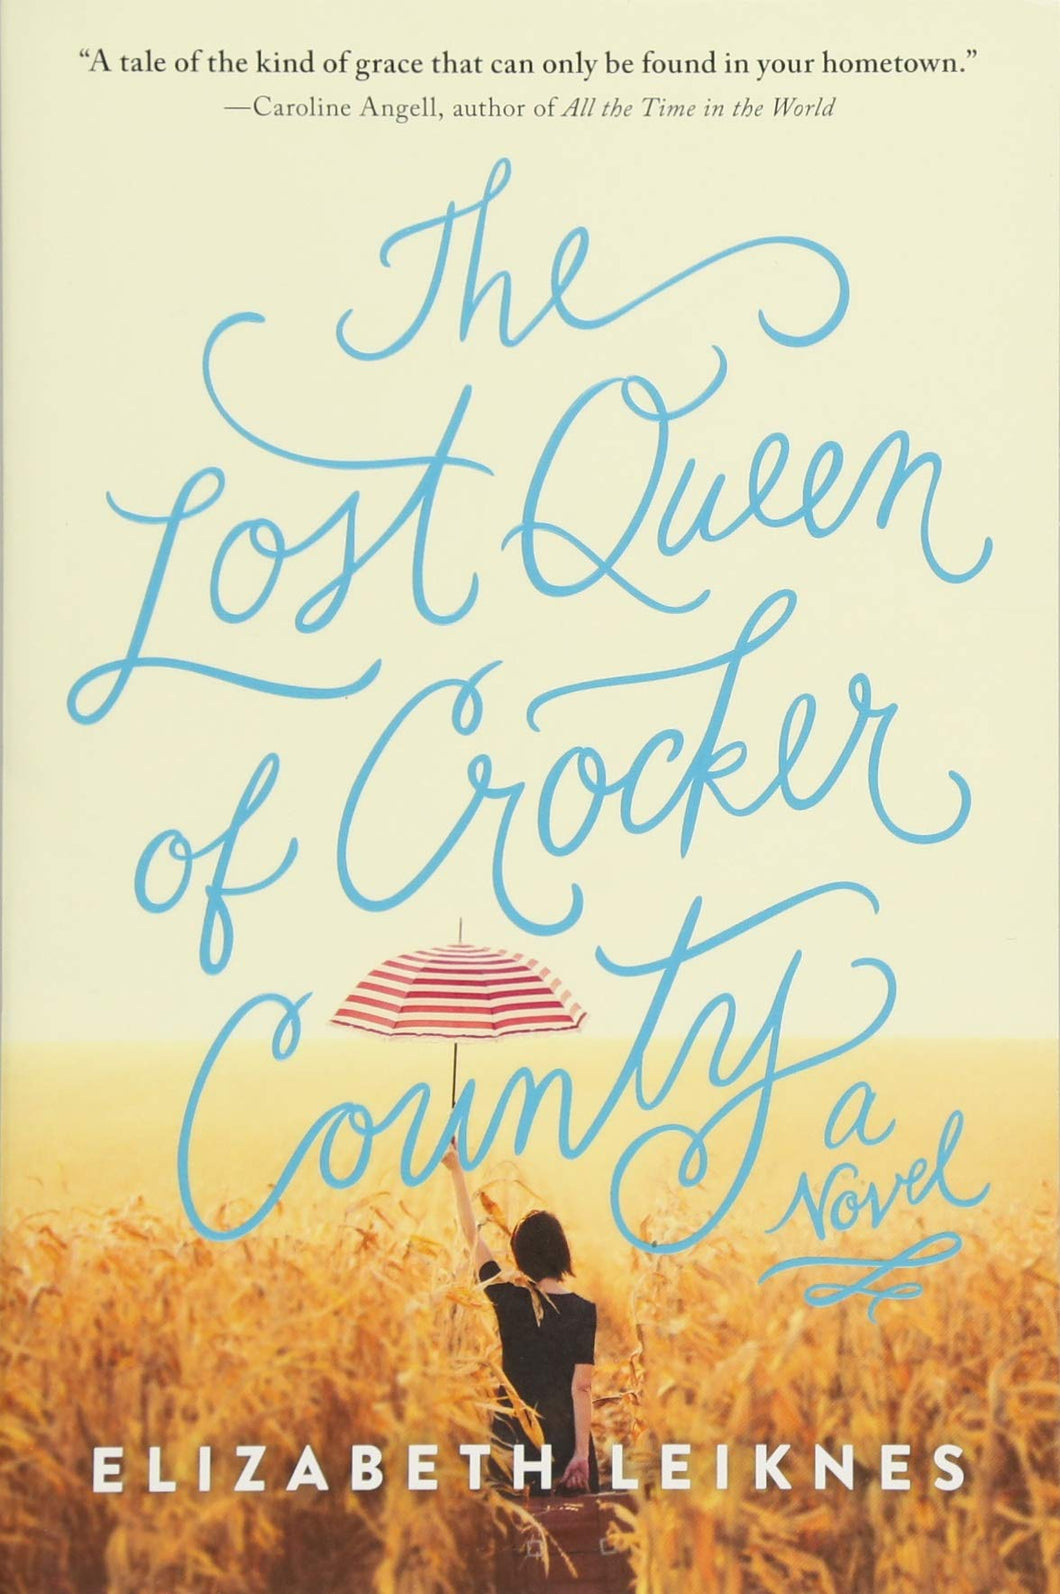 The Lost Queen of Crocker County: A Novel